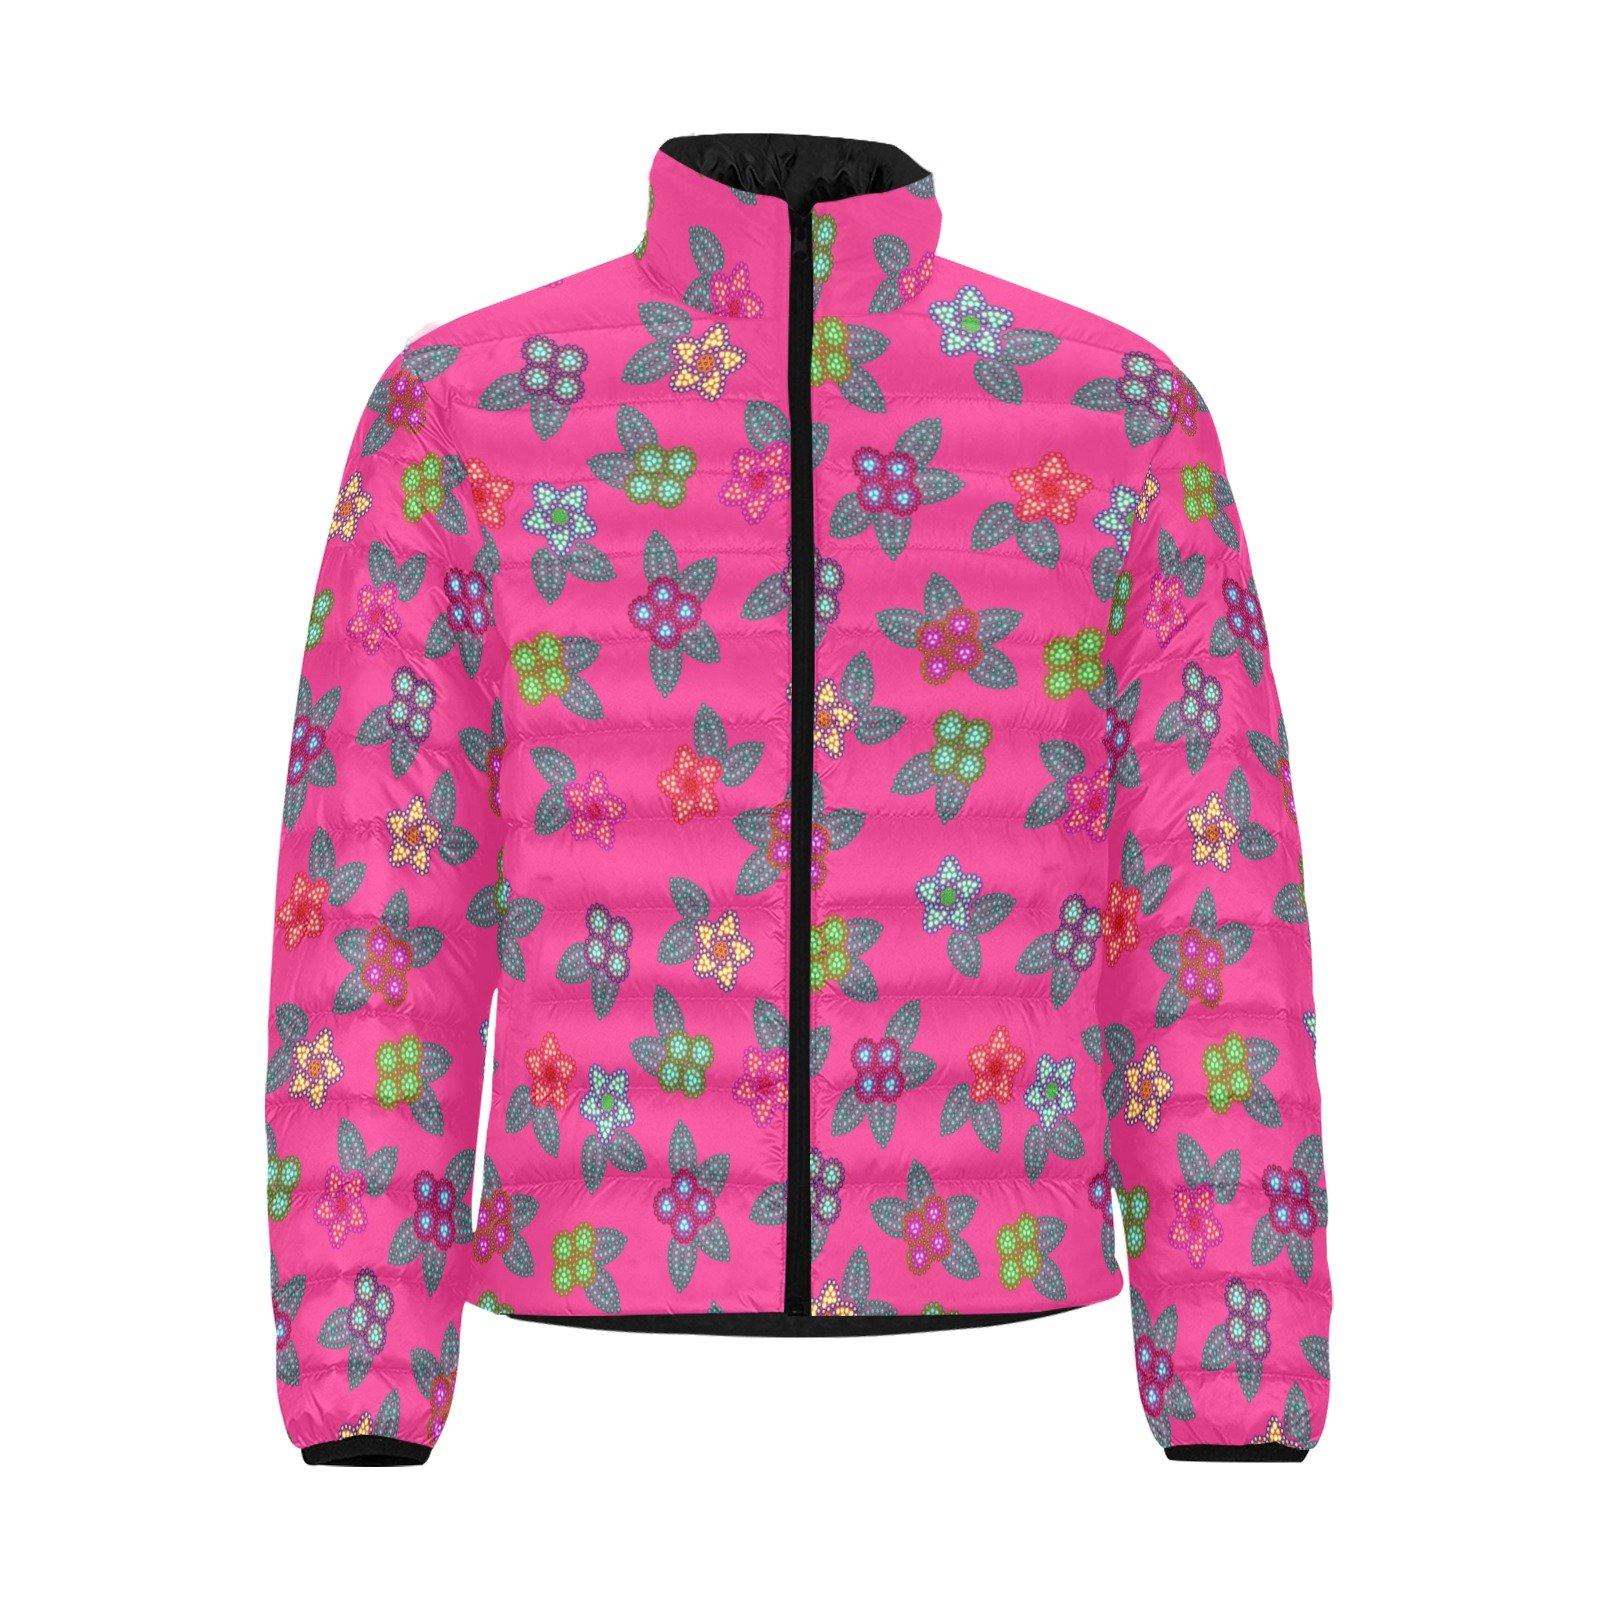 Berry Flowers Men's Stand Collar Padded Jacket (Model H41) Men's Stand Collar Padded Jacket (H41) e-joyer 